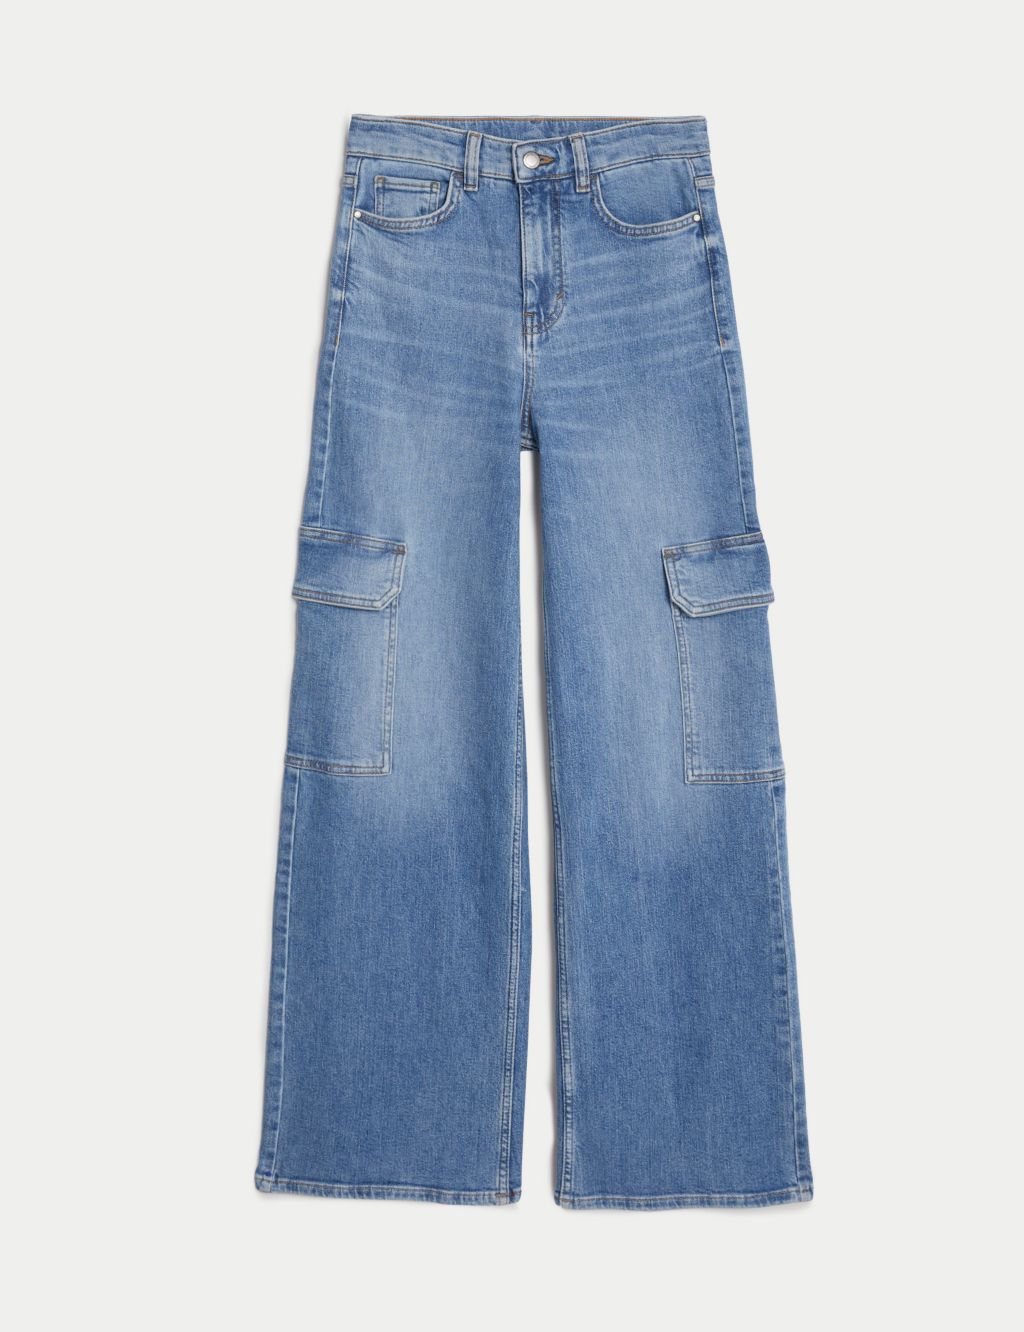 High Waisted Wide Leg Cargo Jeans image 1